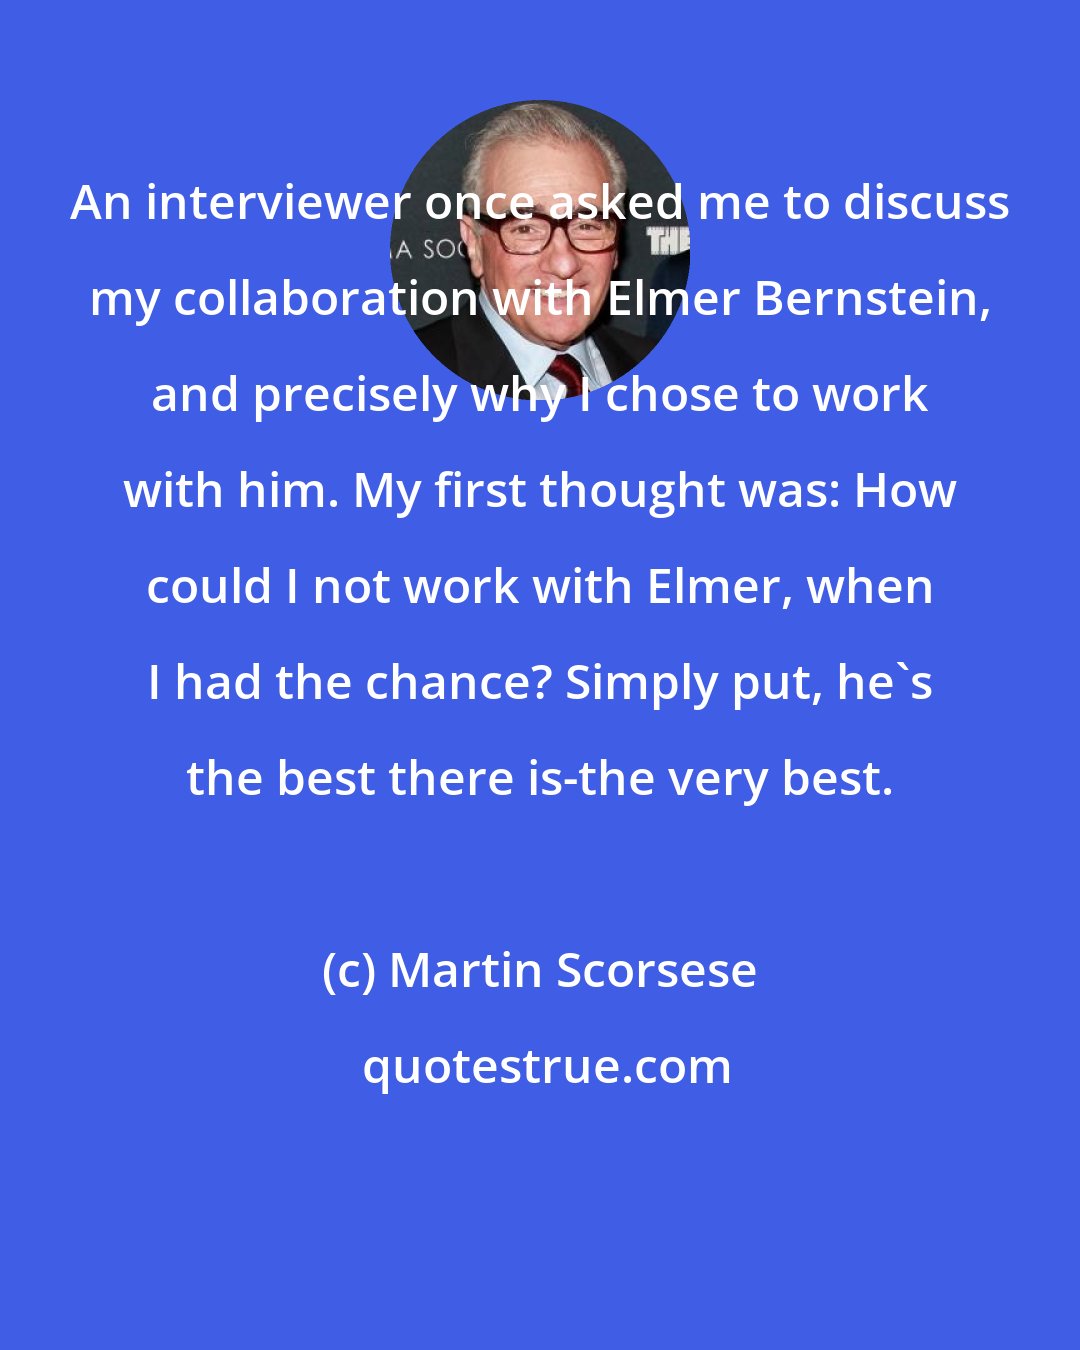 Martin Scorsese: An interviewer once asked me to discuss my collaboration with Elmer Bernstein, and precisely why I chose to work with him. My first thought was: How could I not work with Elmer, when I had the chance? Simply put, he's the best there is-the very best.